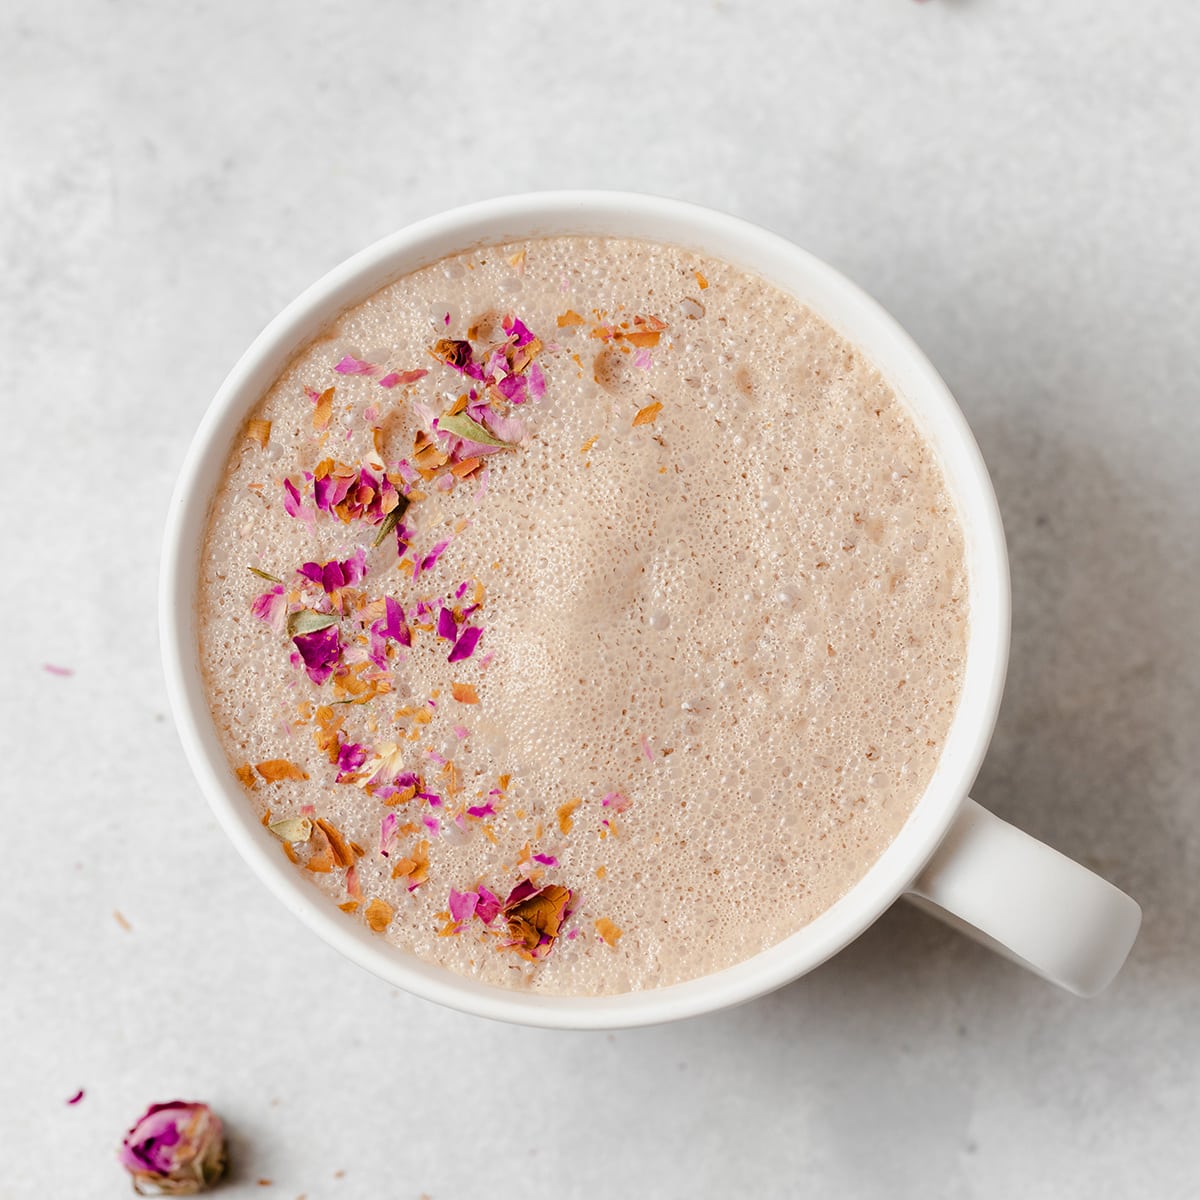 Hibiscus earl grey latte in a white mug on a light grey background. Garnished with crushed dried rose petals.